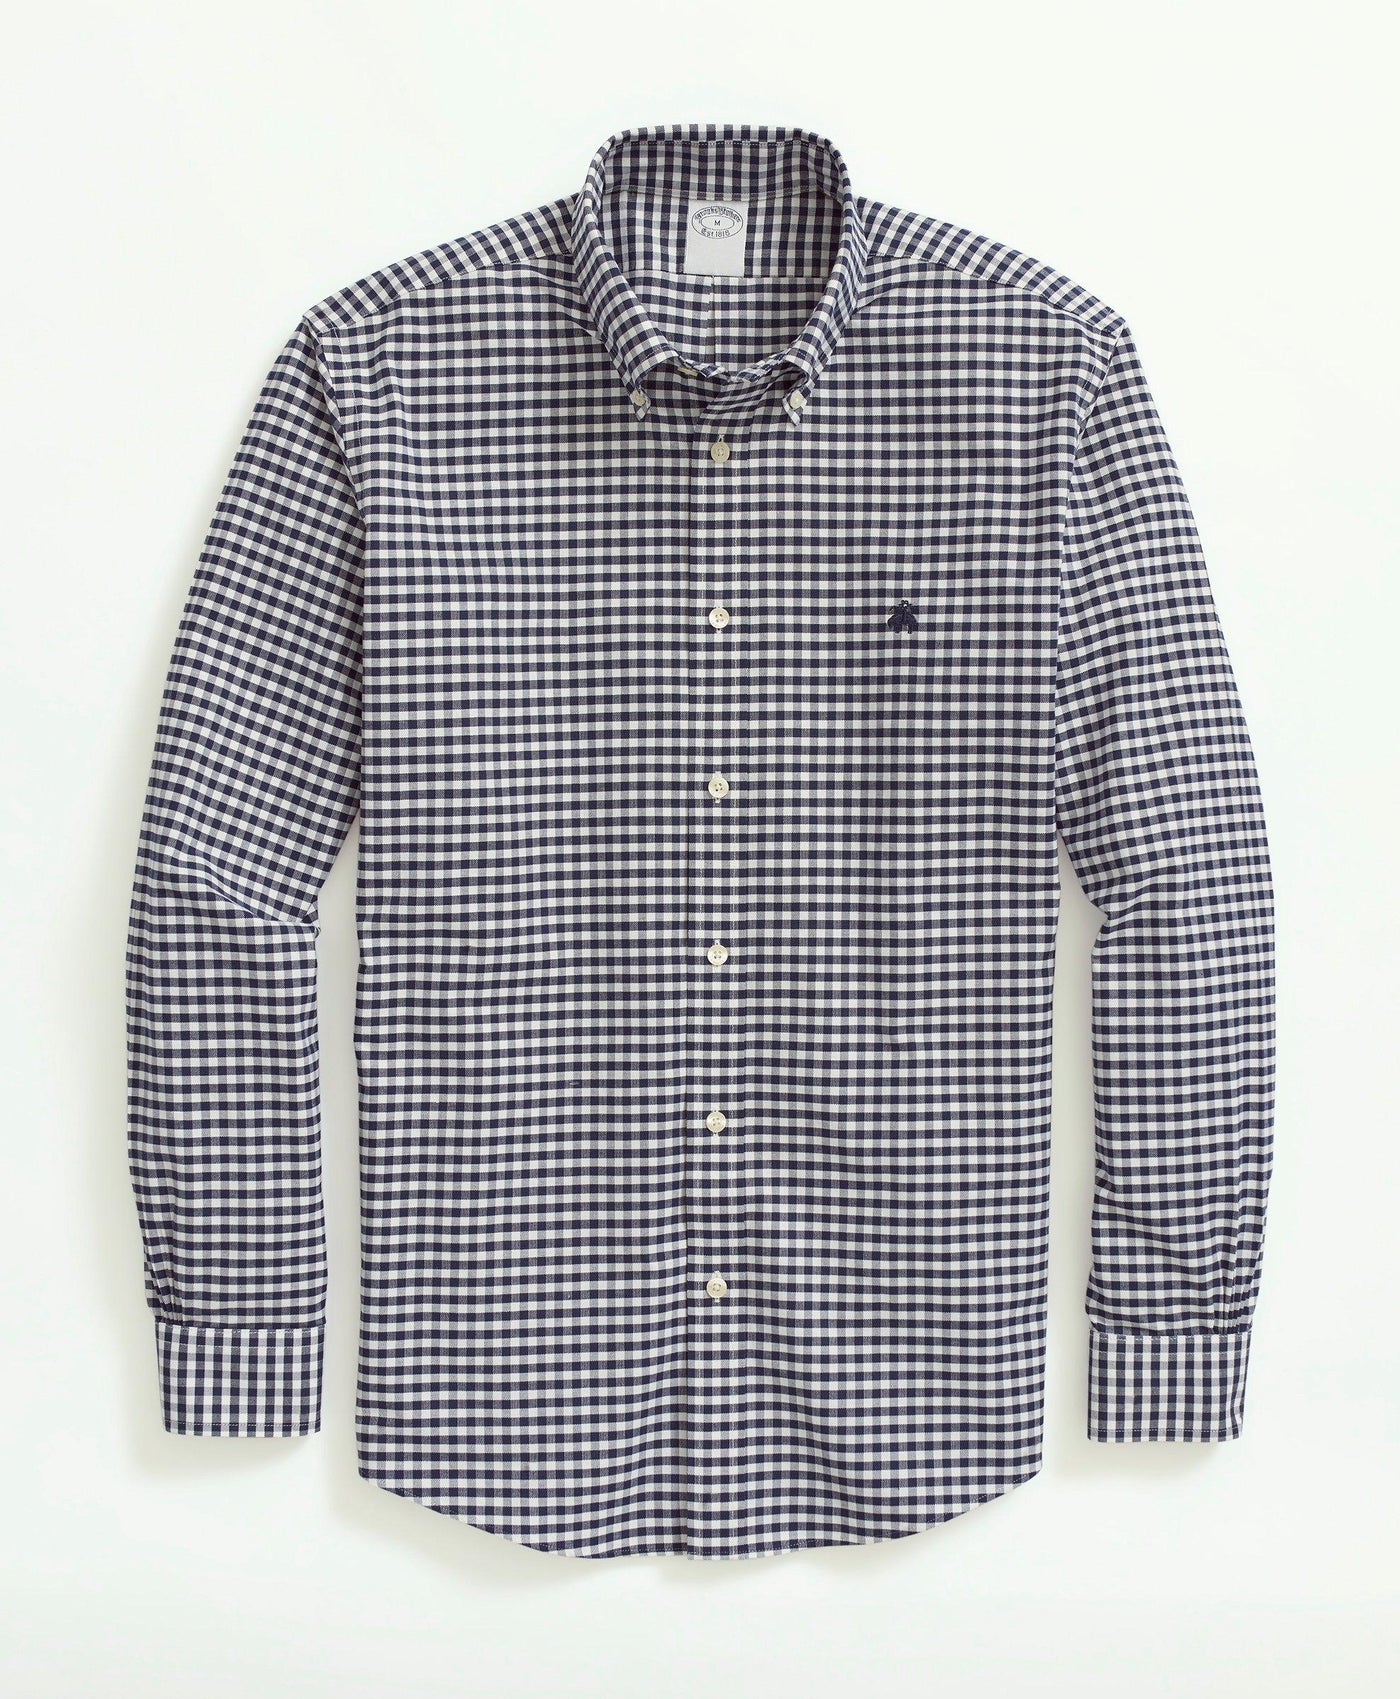 Regular Regent-Fit Stretch Non-Iron Oxford Button-Down Collar, Gingham Sport Shirt - Brooks Brothers Canada